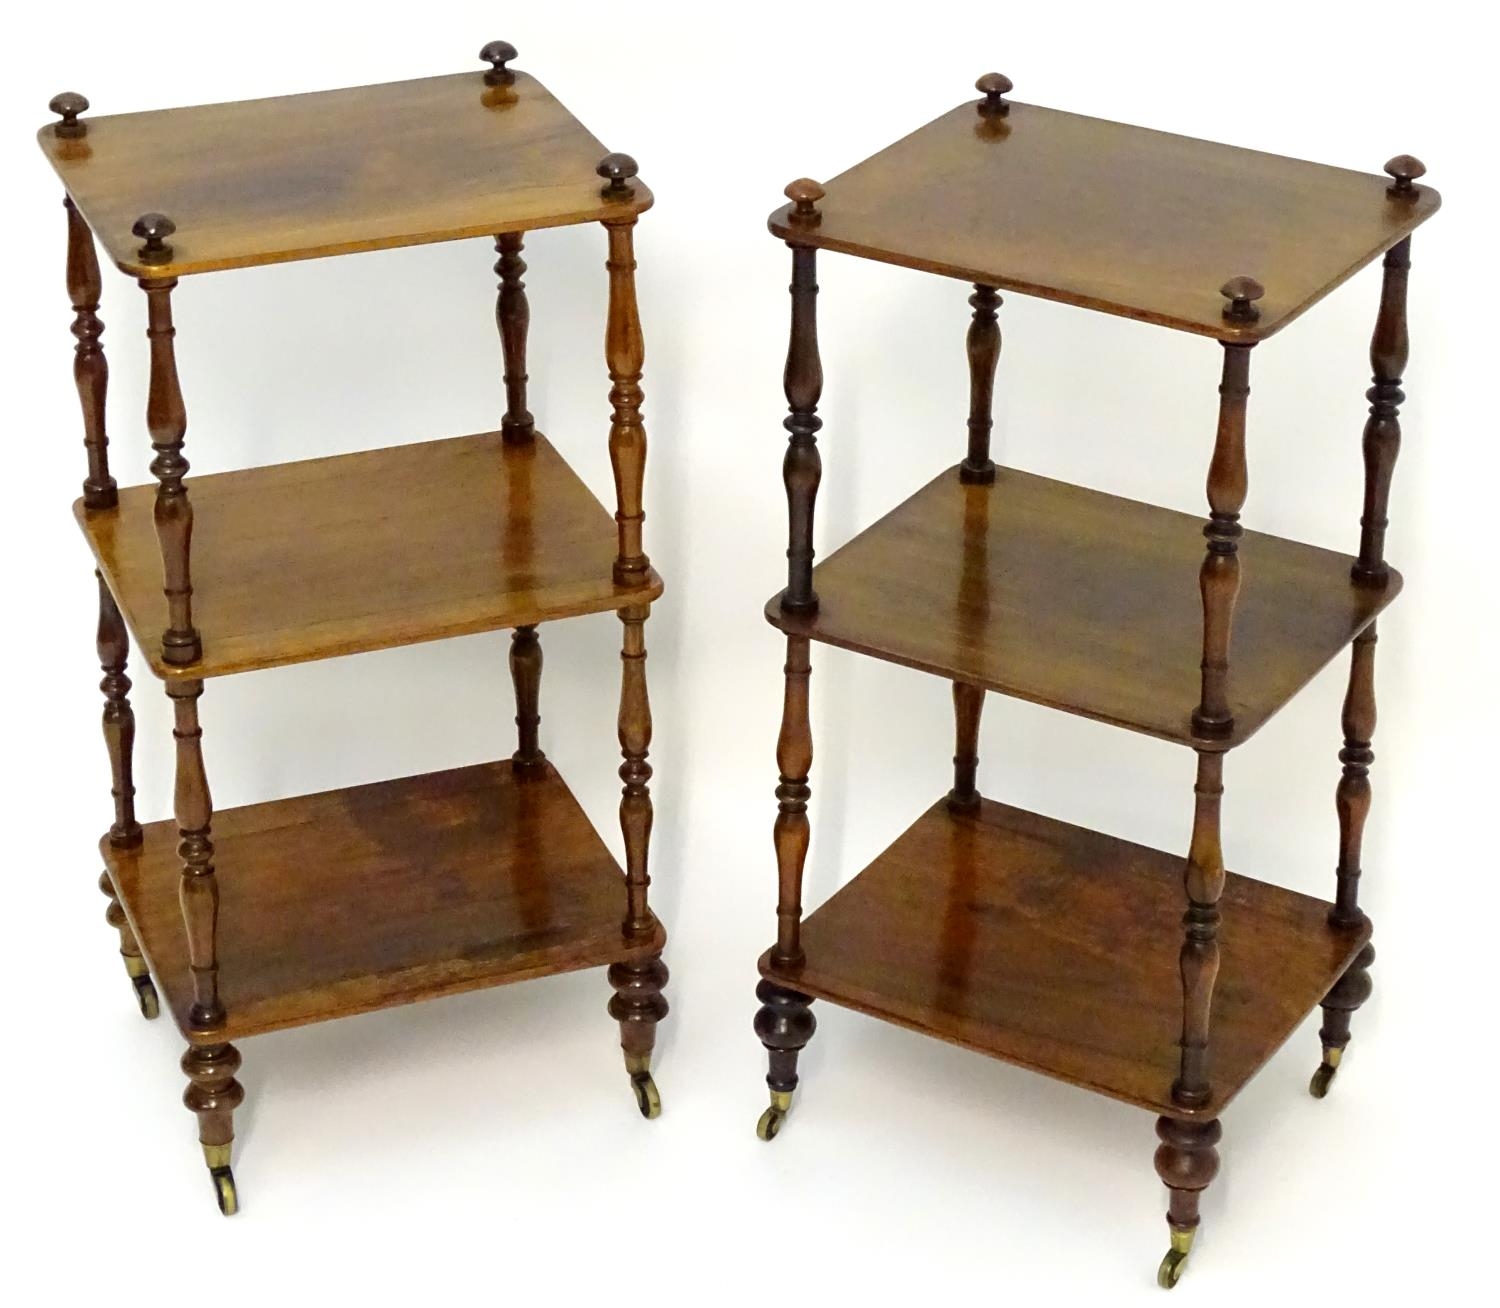 A pair of regency rosewood whatnots with turned finials to the tops and three tiers united by turned